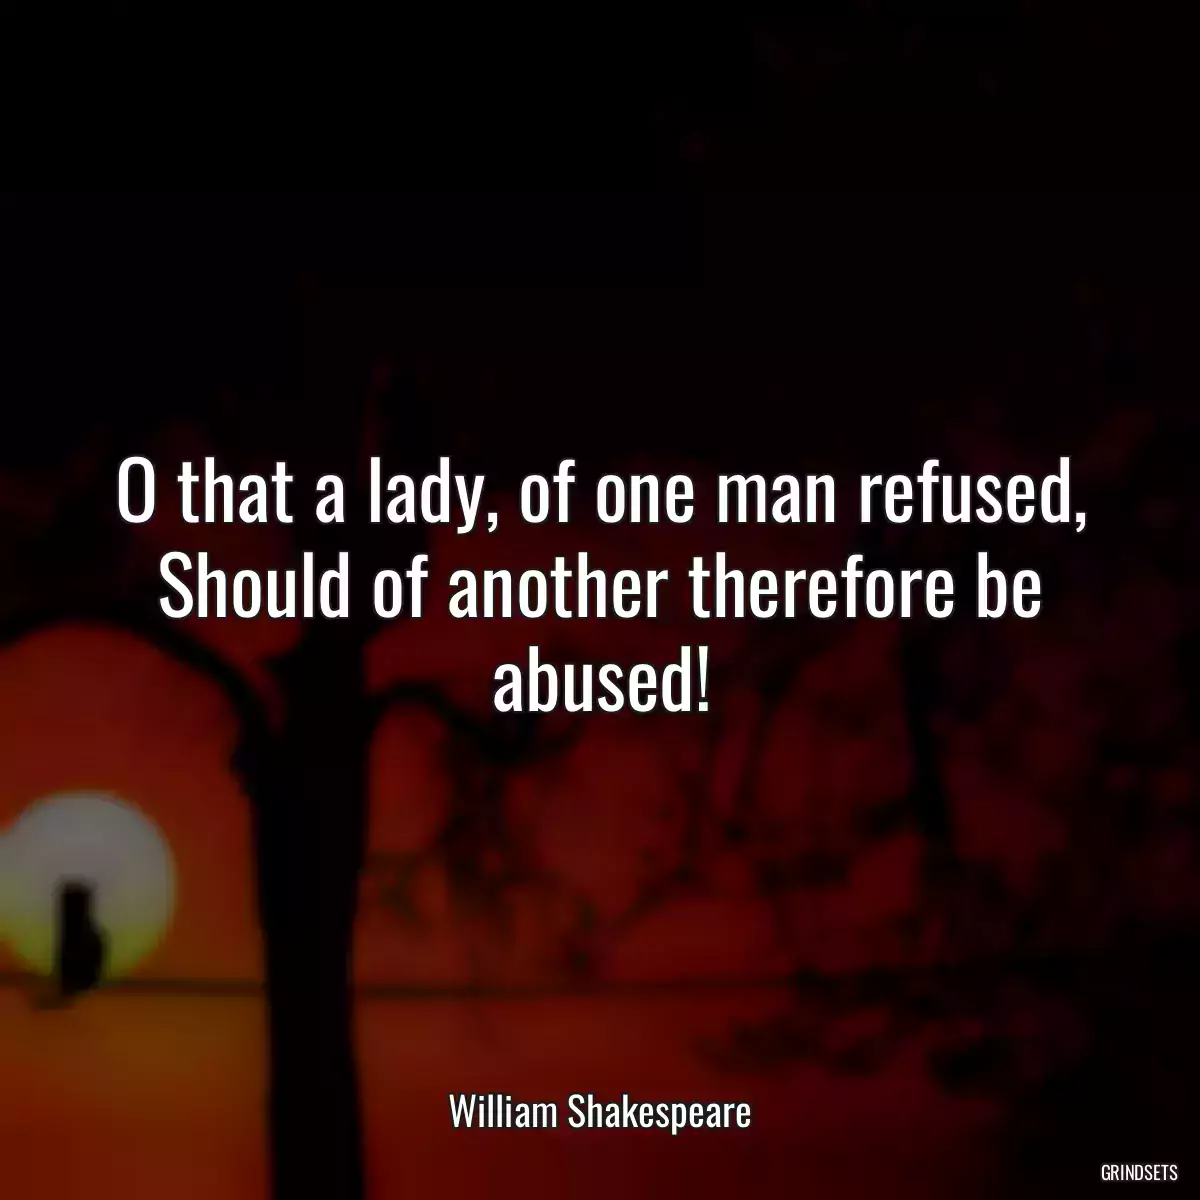 O that a lady, of one man refused,
Should of another therefore be abused!